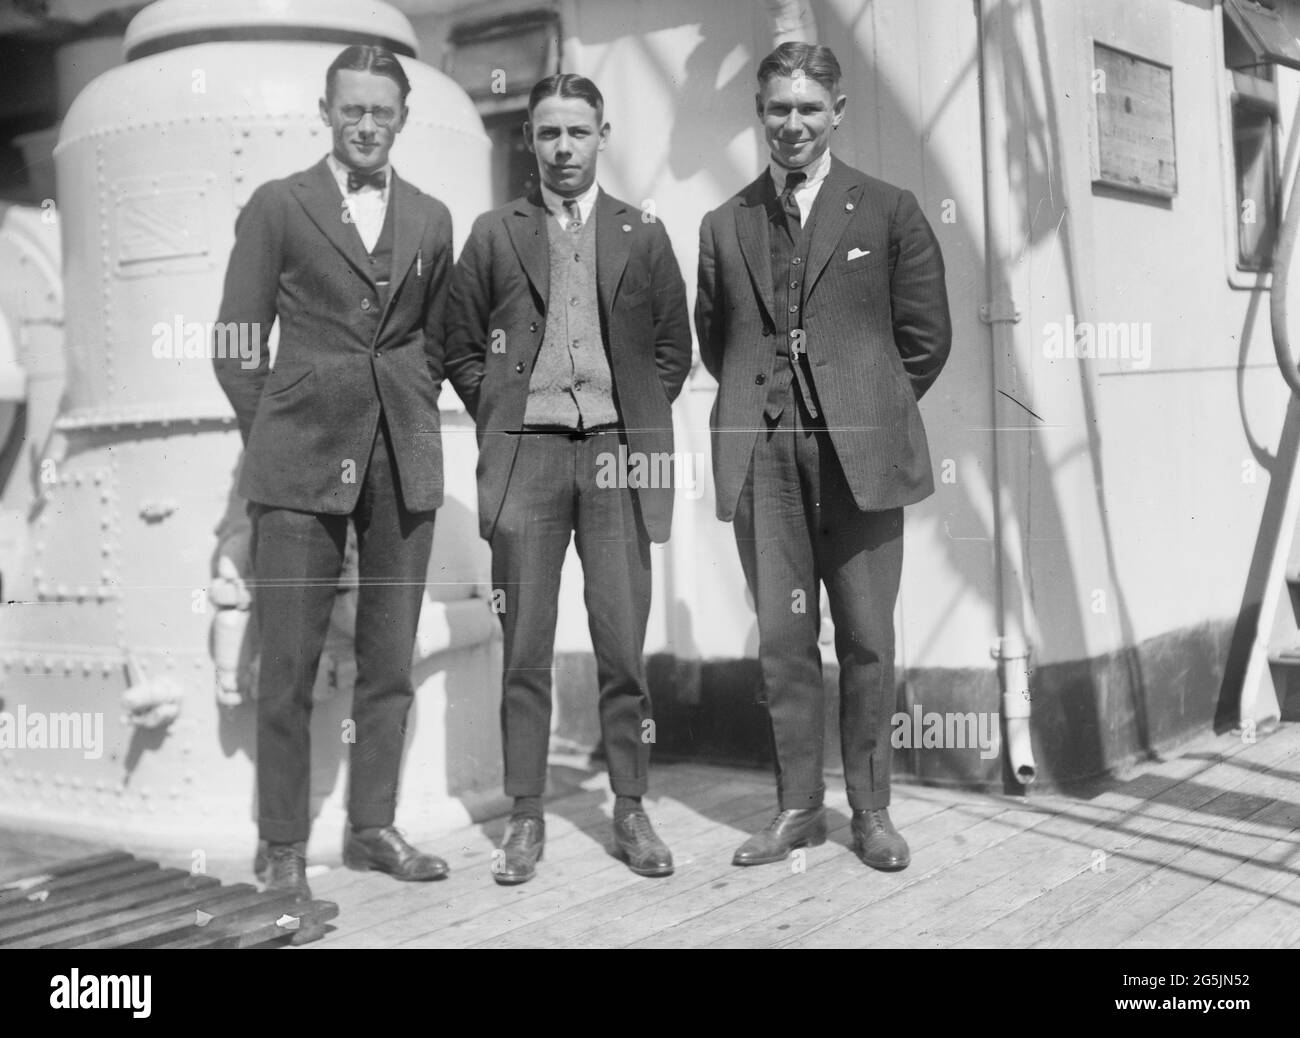 Photograph shows wrestler Charles Edwin 'Charley' Ackerly (1898-1982), diver Louis Edward 'Hap' Kuehn (1901-1981), and athlete Charles 'Charley' William Paddock (1900-1943) who competed for the Americans in the 1920 Summer Olympics. They are arriving in New York City on the Aquitania on September 17, 1920. Stock Photo